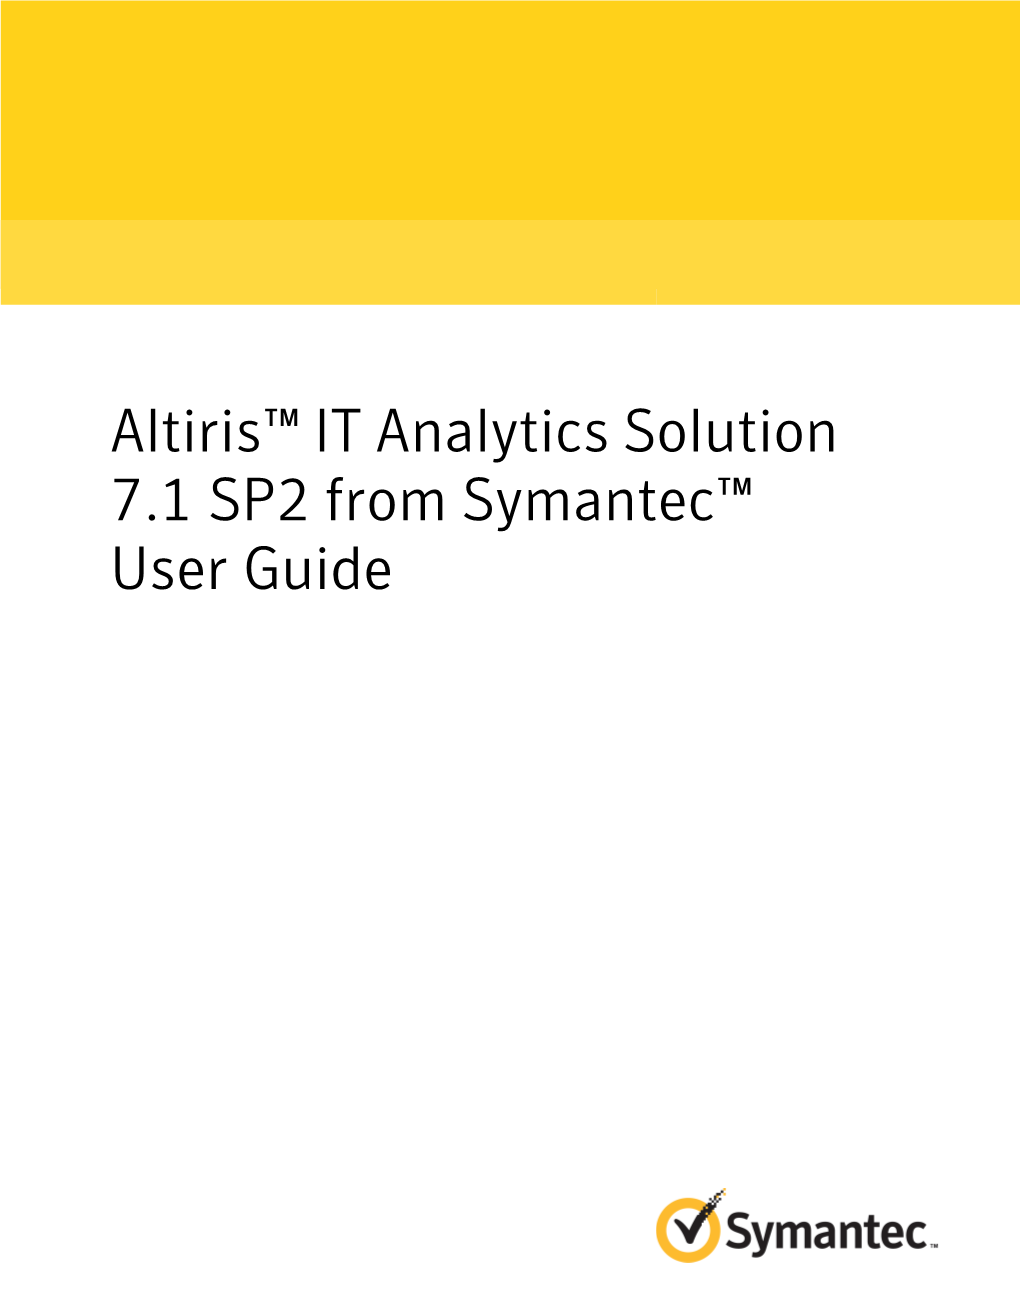 Altiris™ IT Analytics Solution 7.1 SP2 from Symantec™ User Guide Altiris™ IT Analytics Solution 7.1 from Symantec™ User Guide